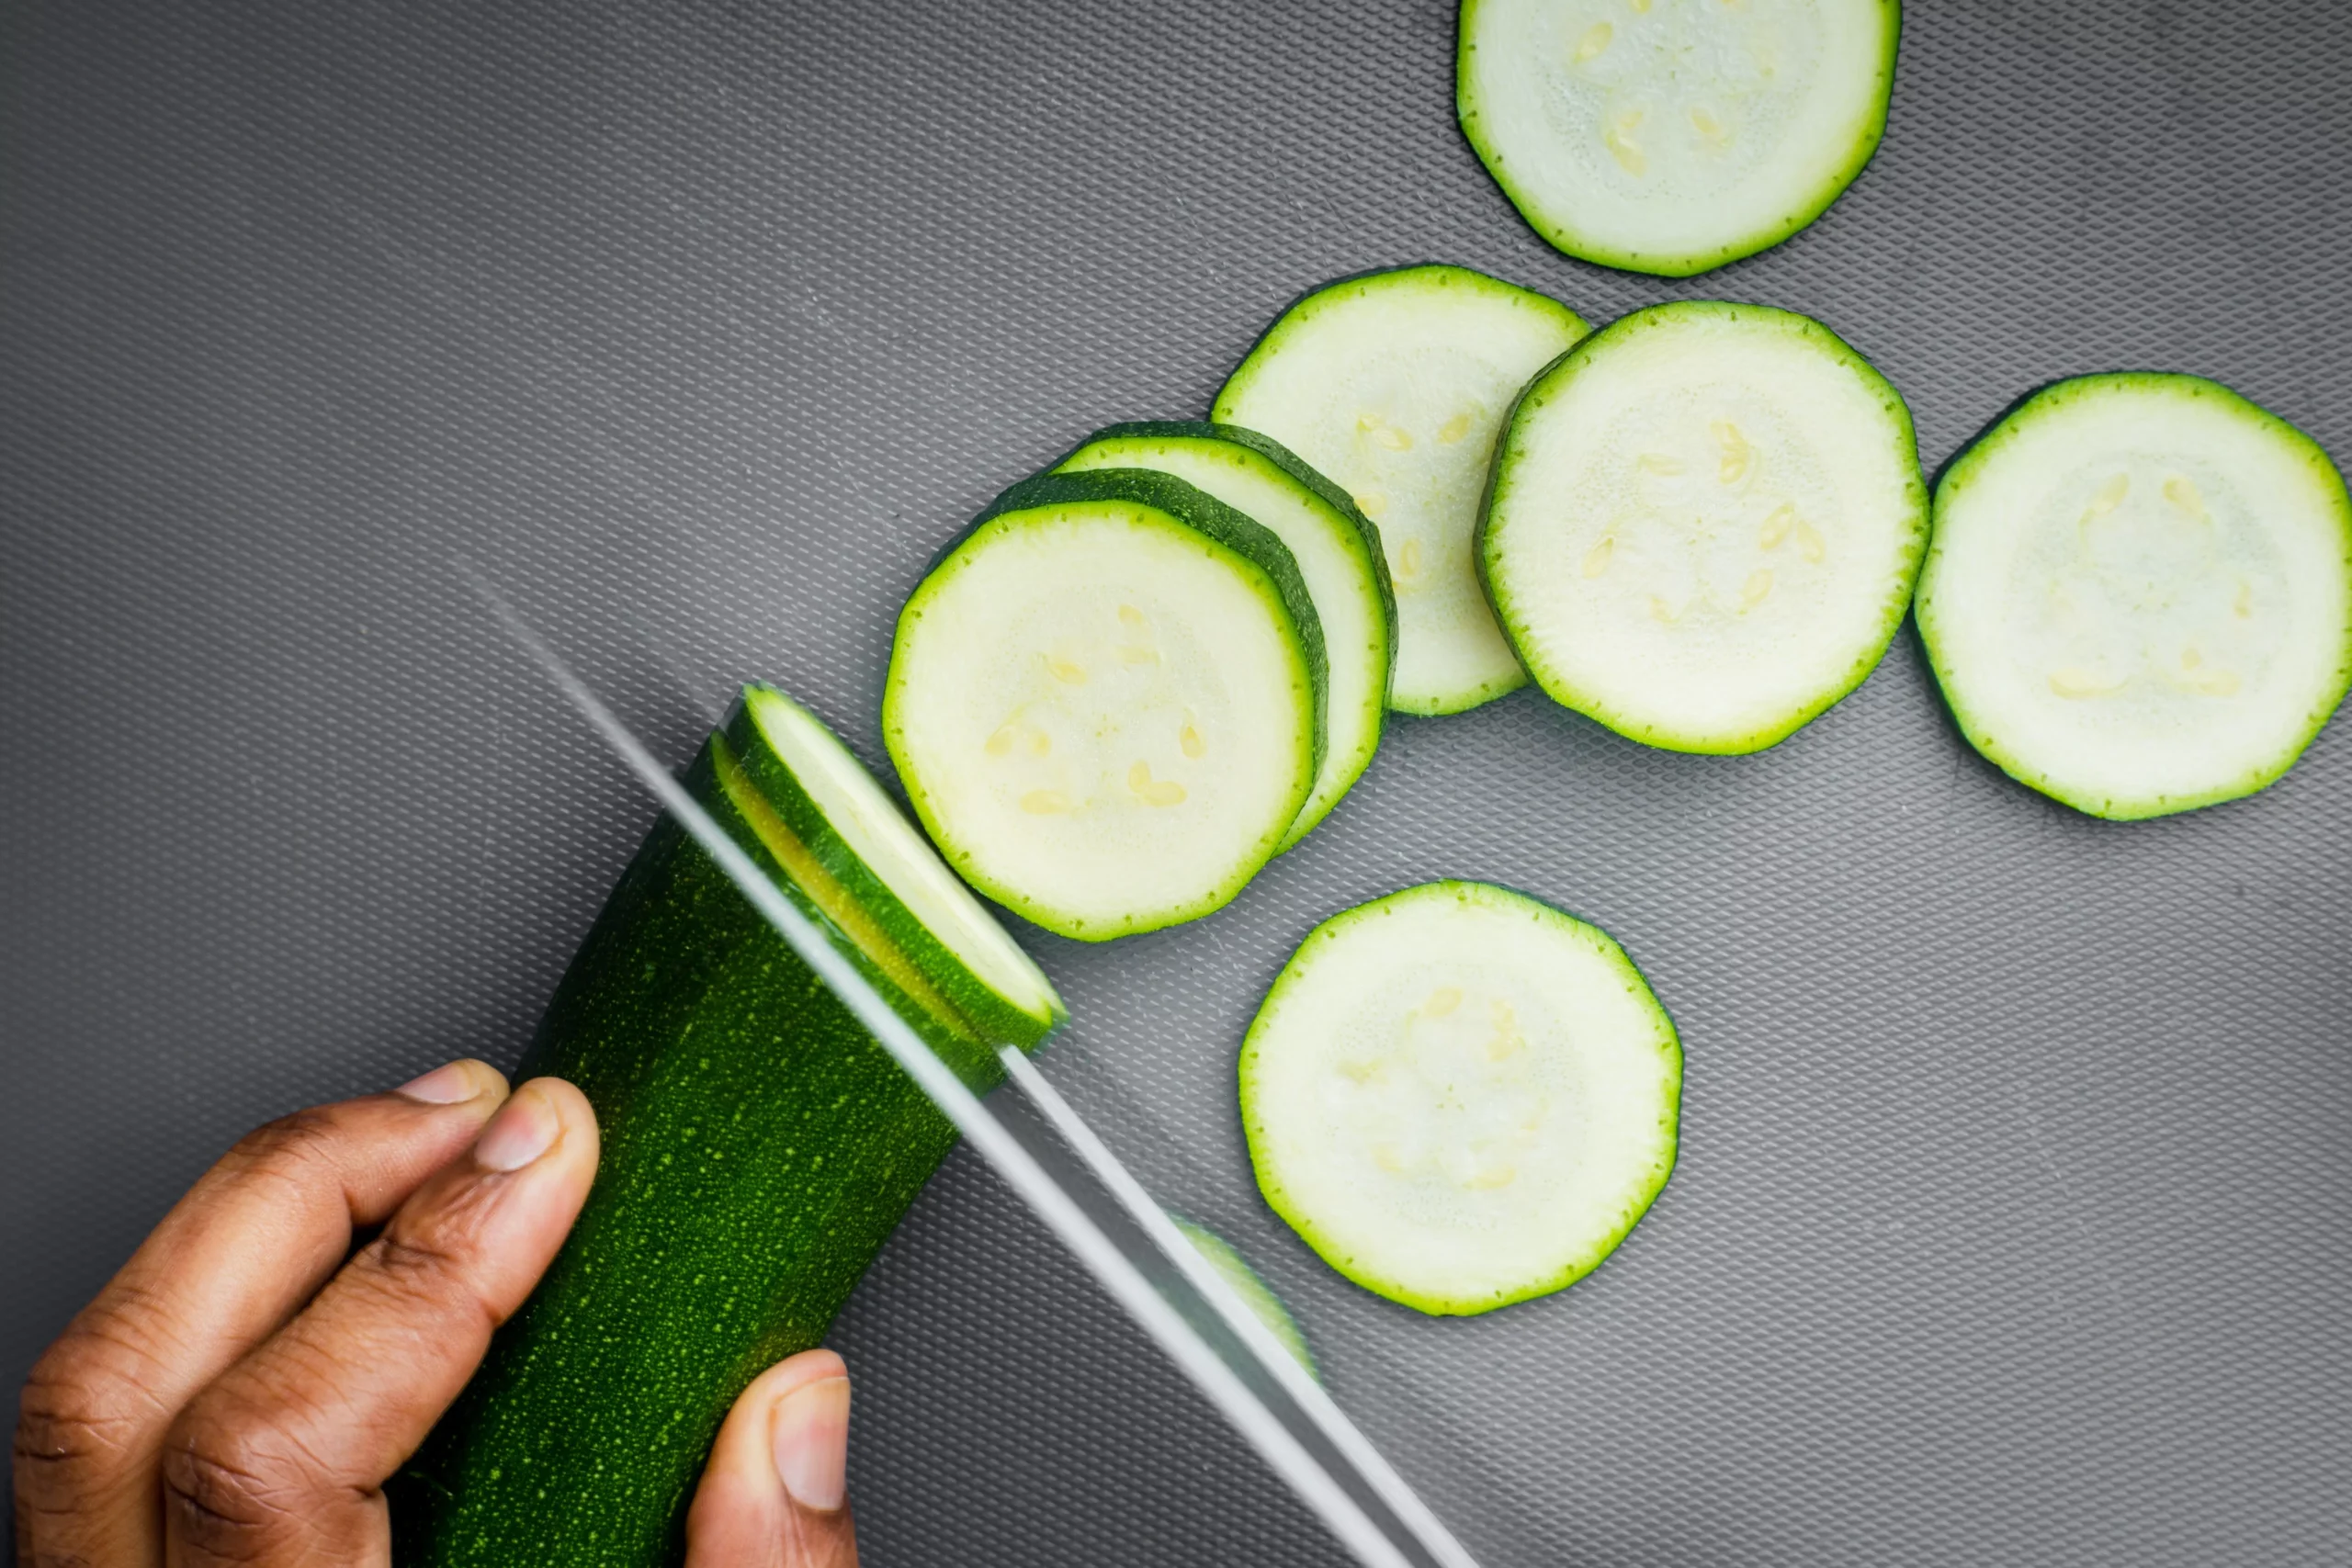 Cucumbers: 7 Health Benefits of Eating Them Regularly